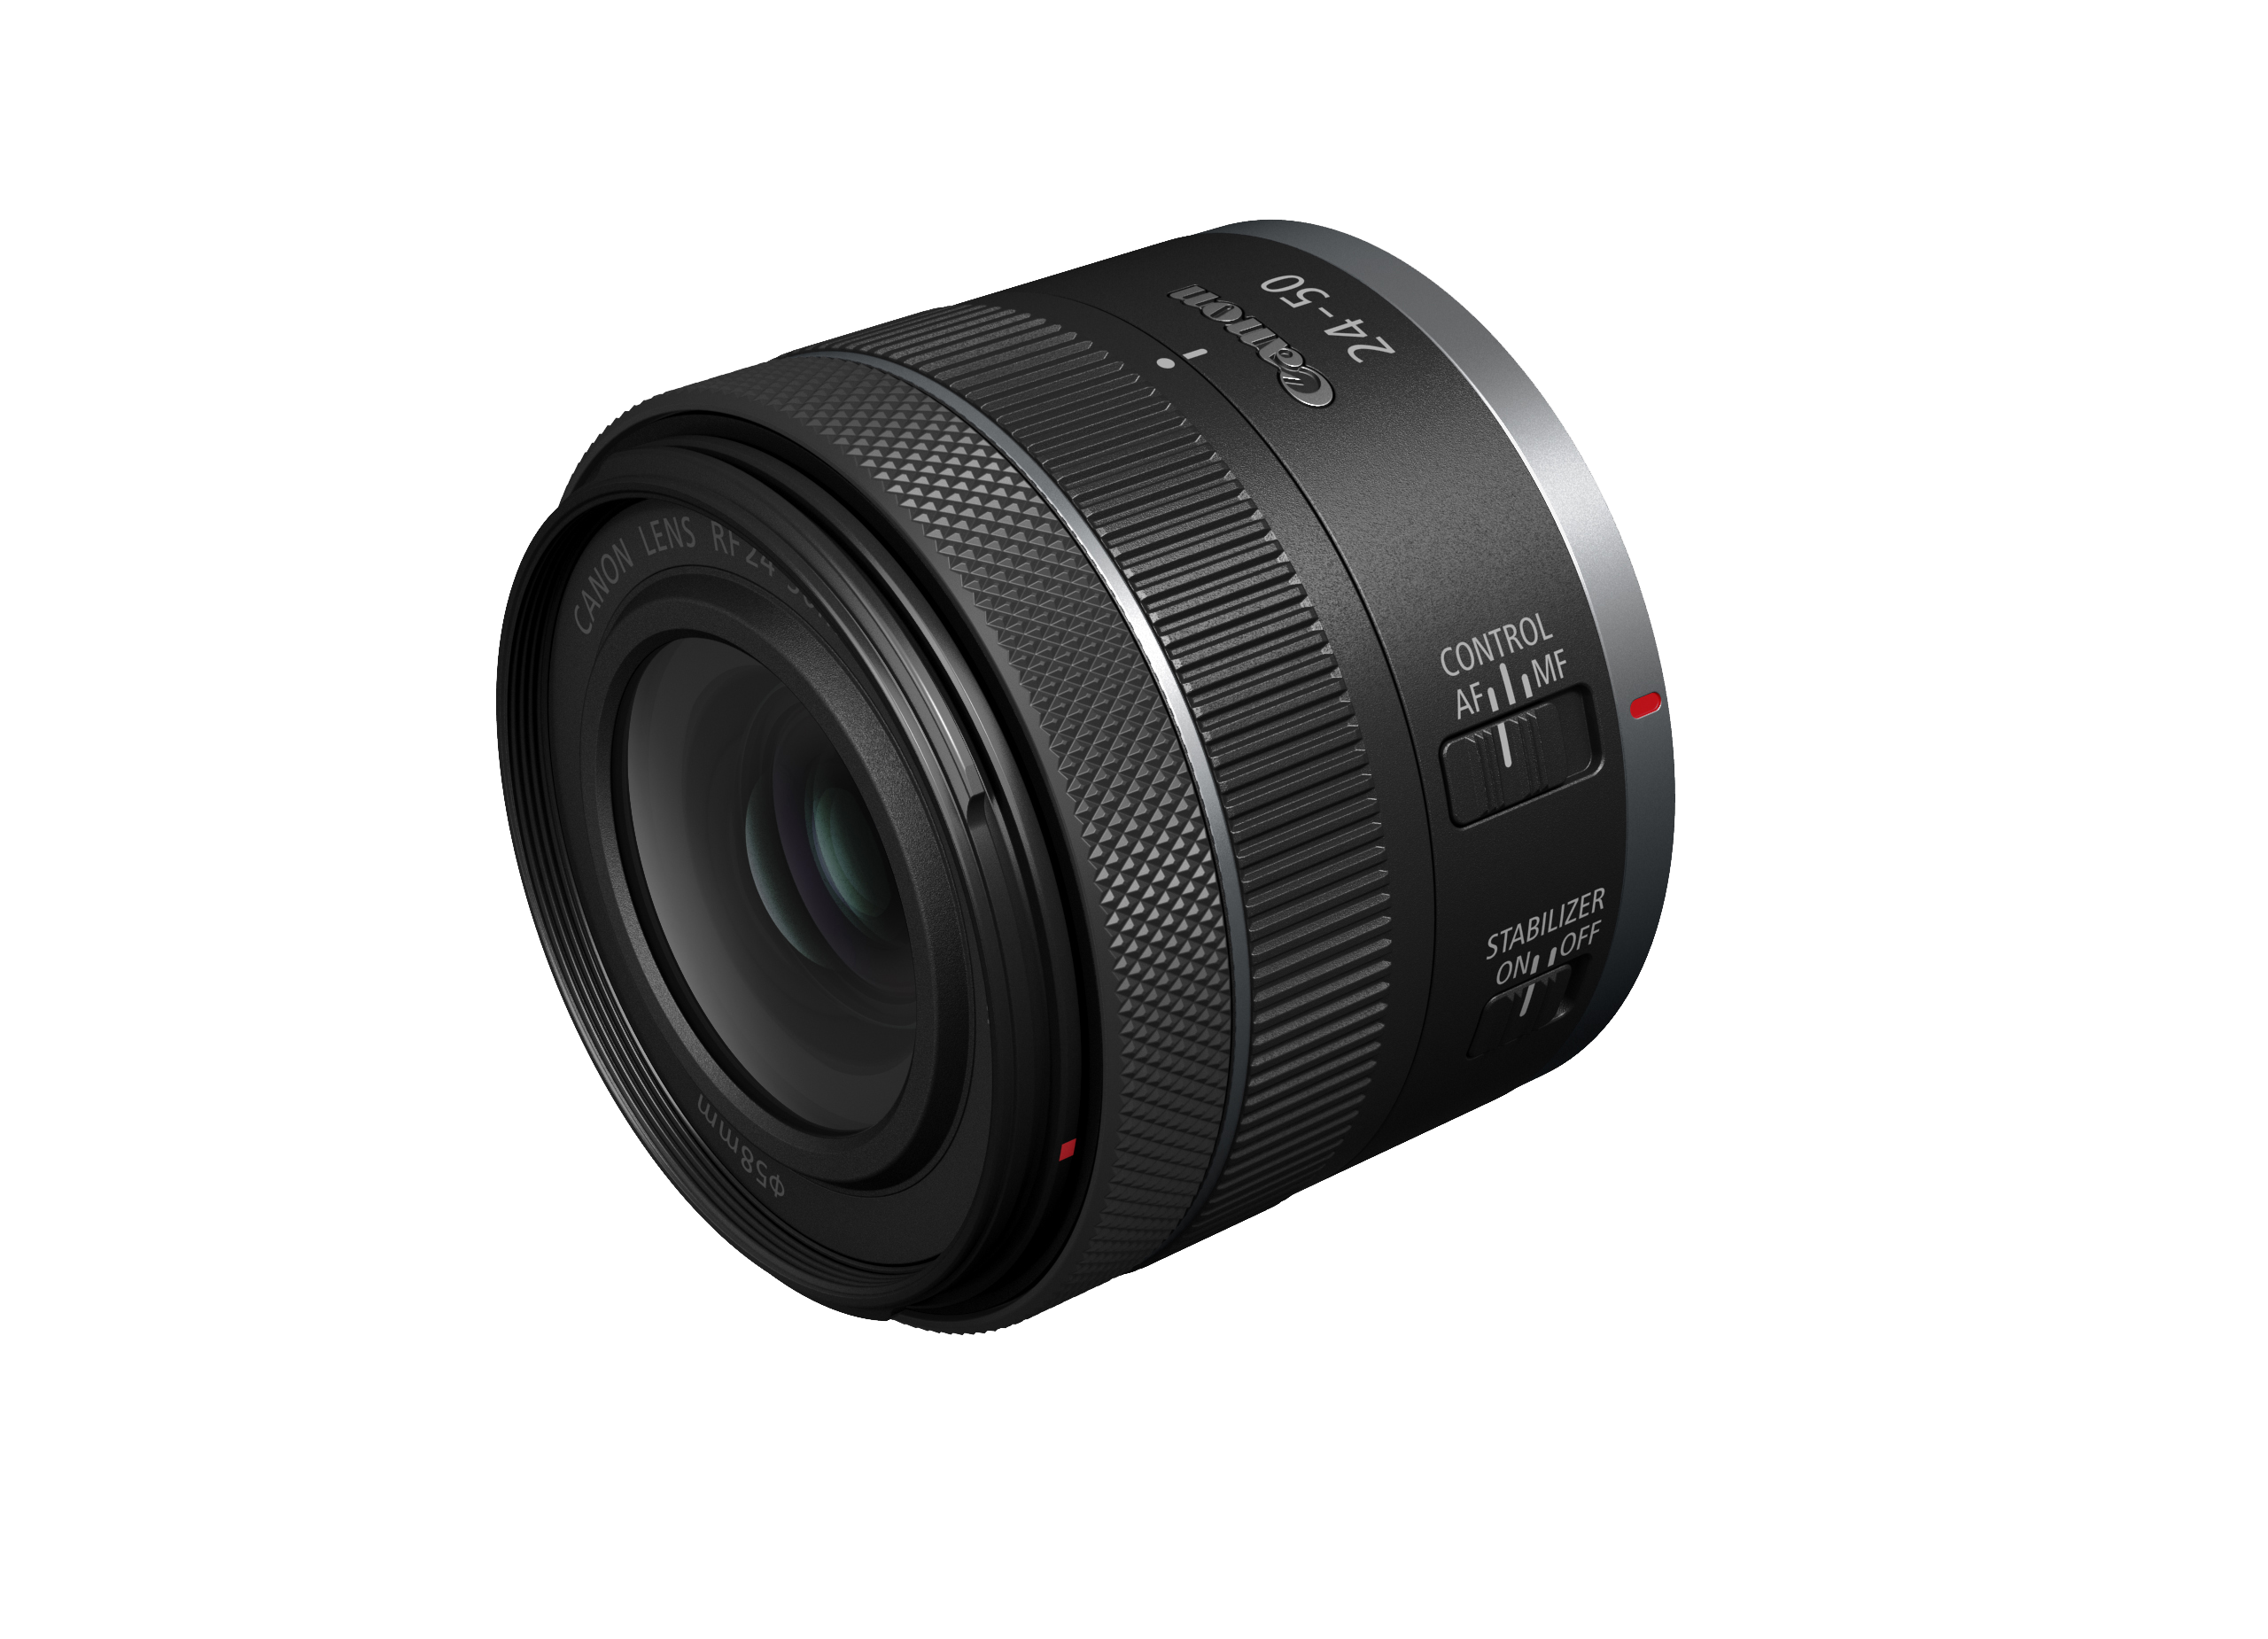 The Canon RF24-50mm F4.5-6.3 IS STM